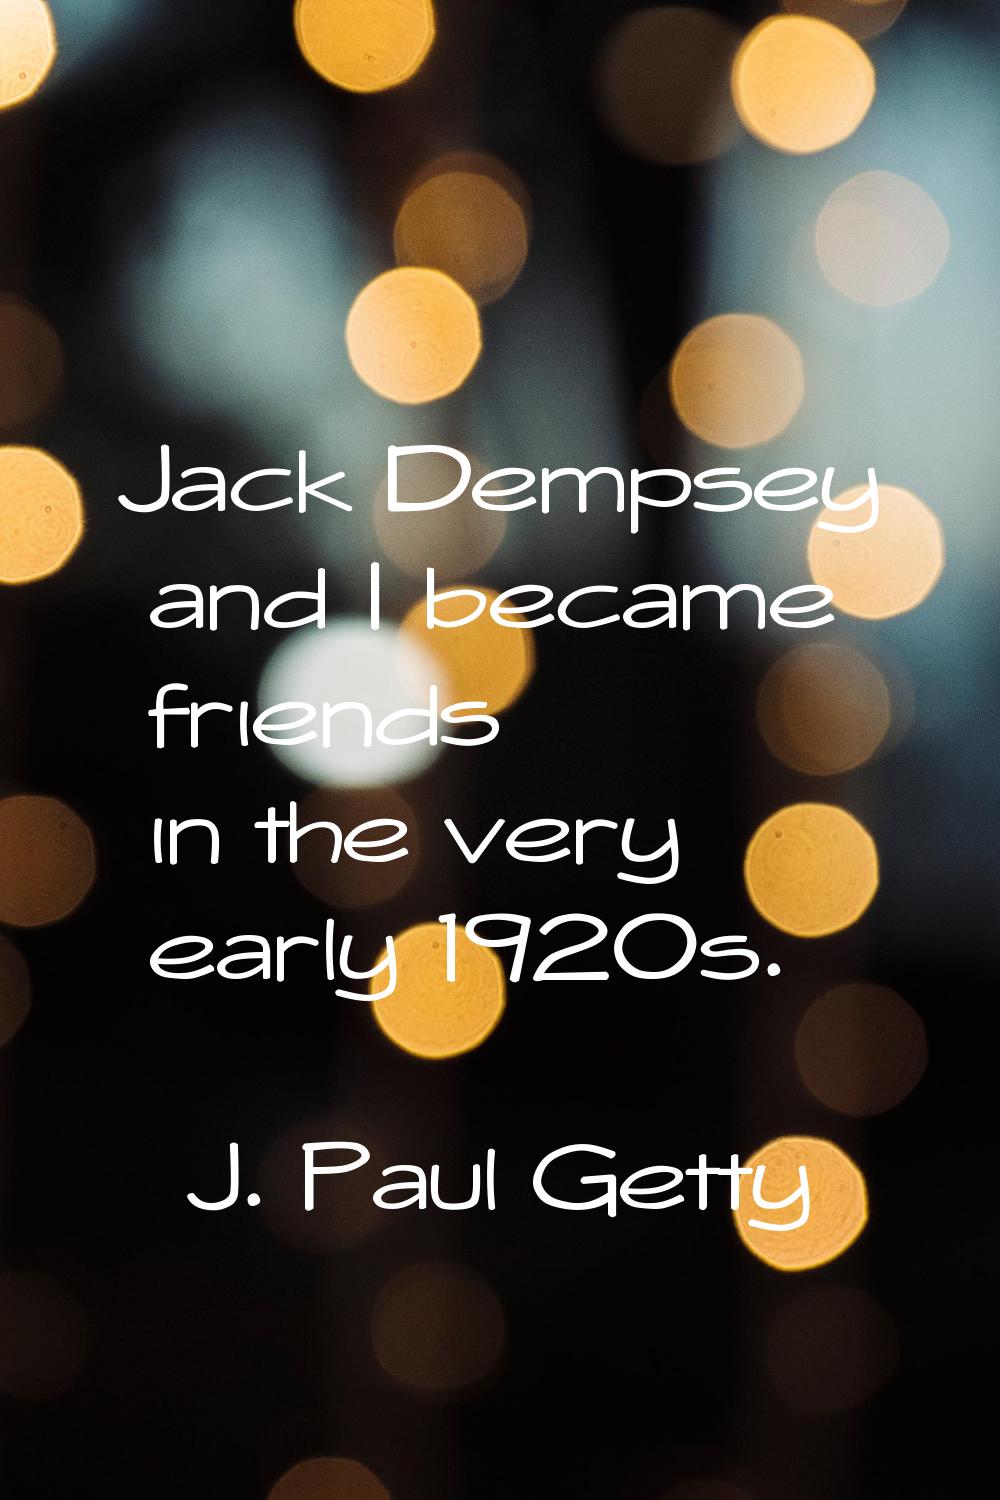 Jack Dempsey and I became friends in the very early 1920s.